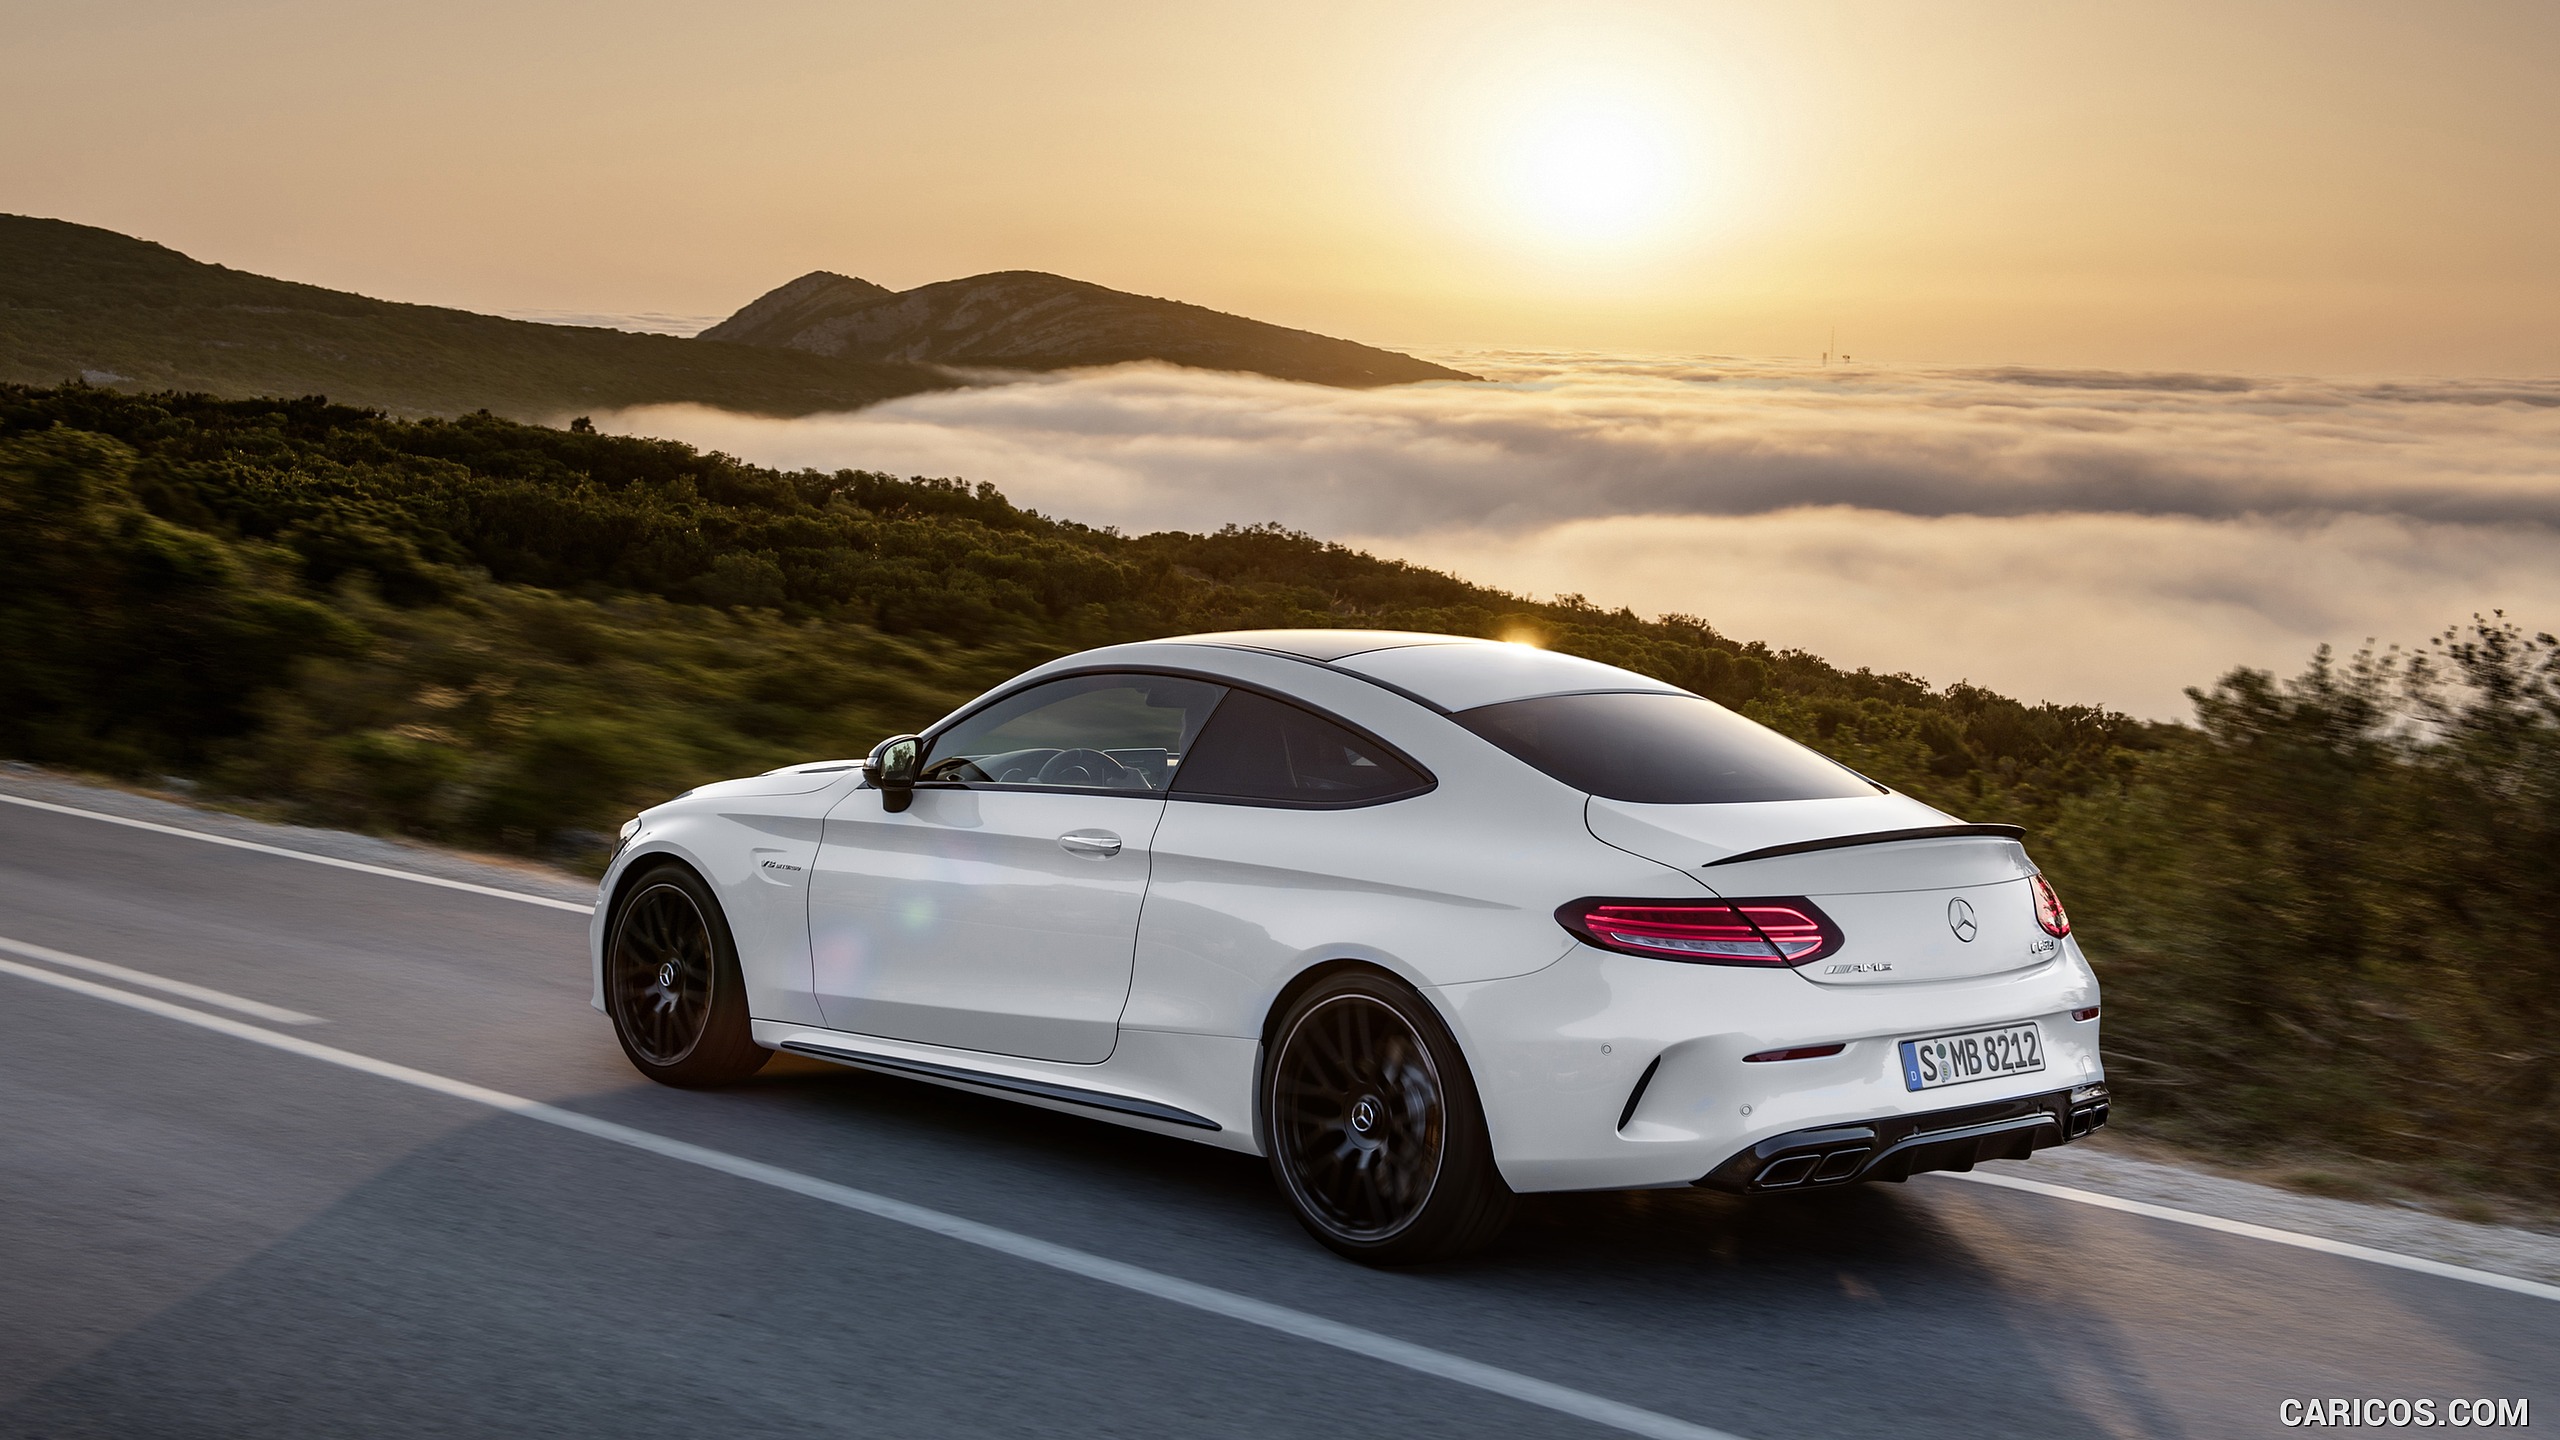 2017 Mercedes-AMG C63 S Coupe (Designo Diamond White Bright with Night Package) - Rear, #35 of 107